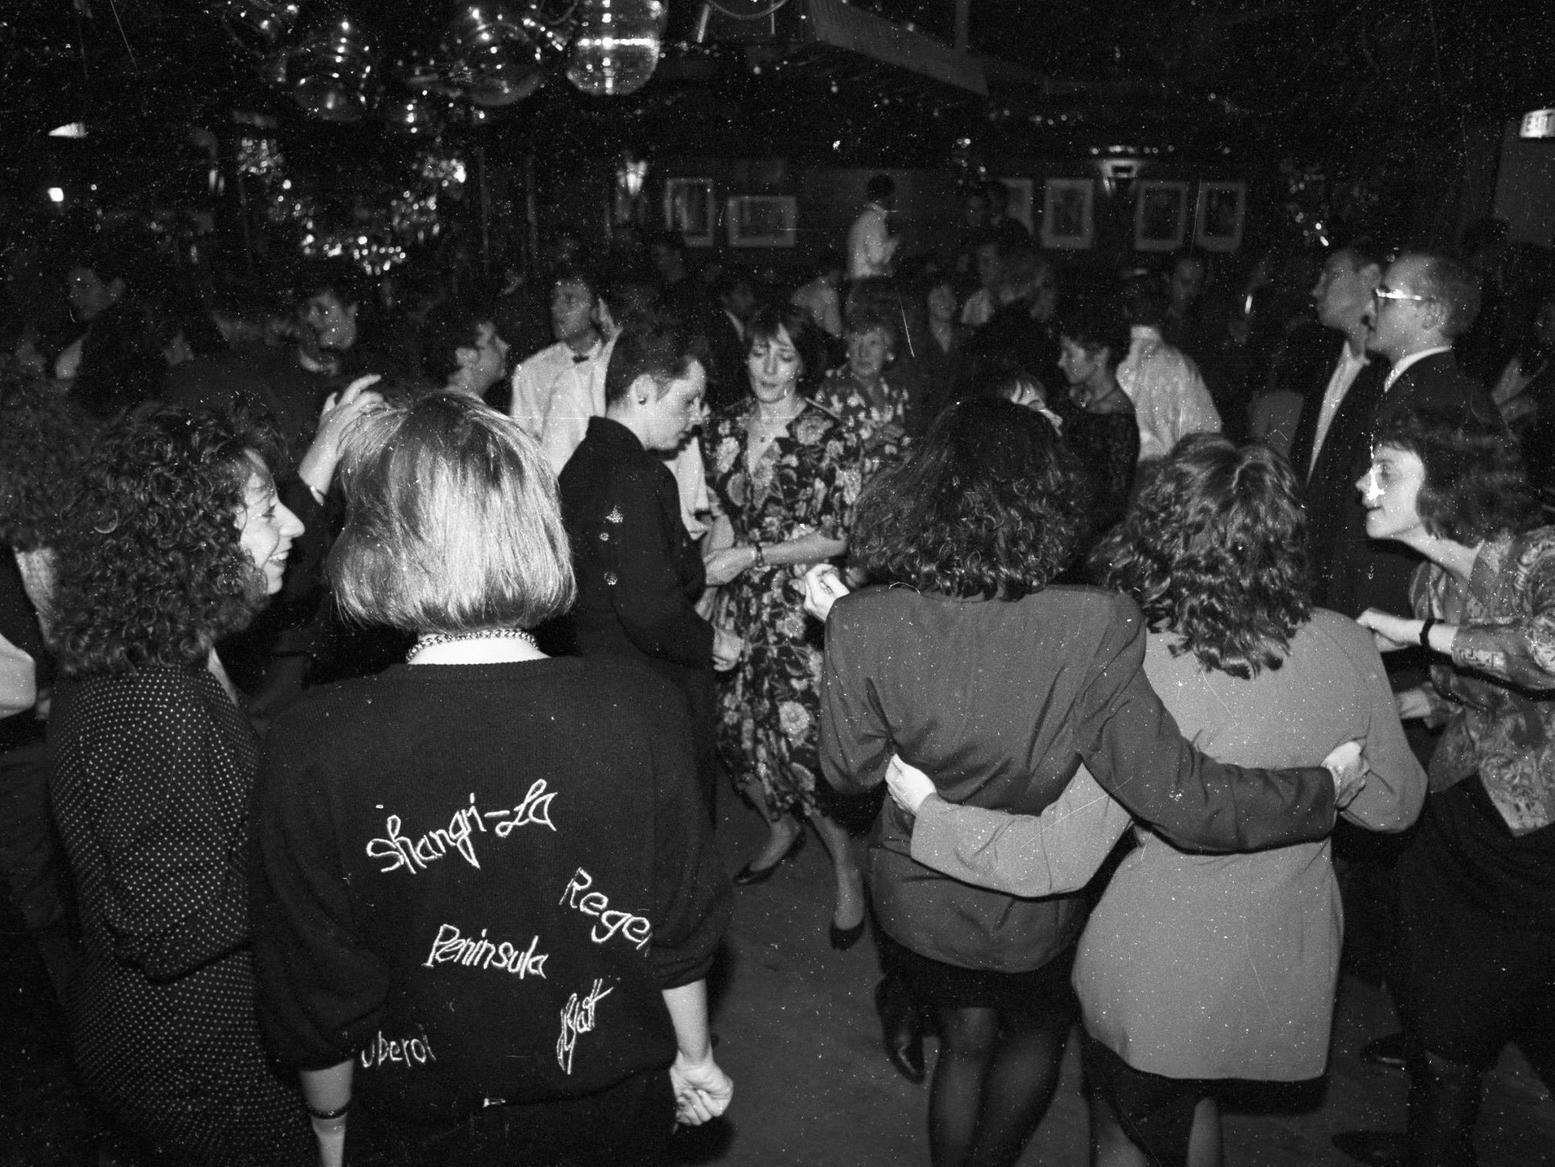 Early 1990s fashions on show in this photo. But in which nightclub was it taken?